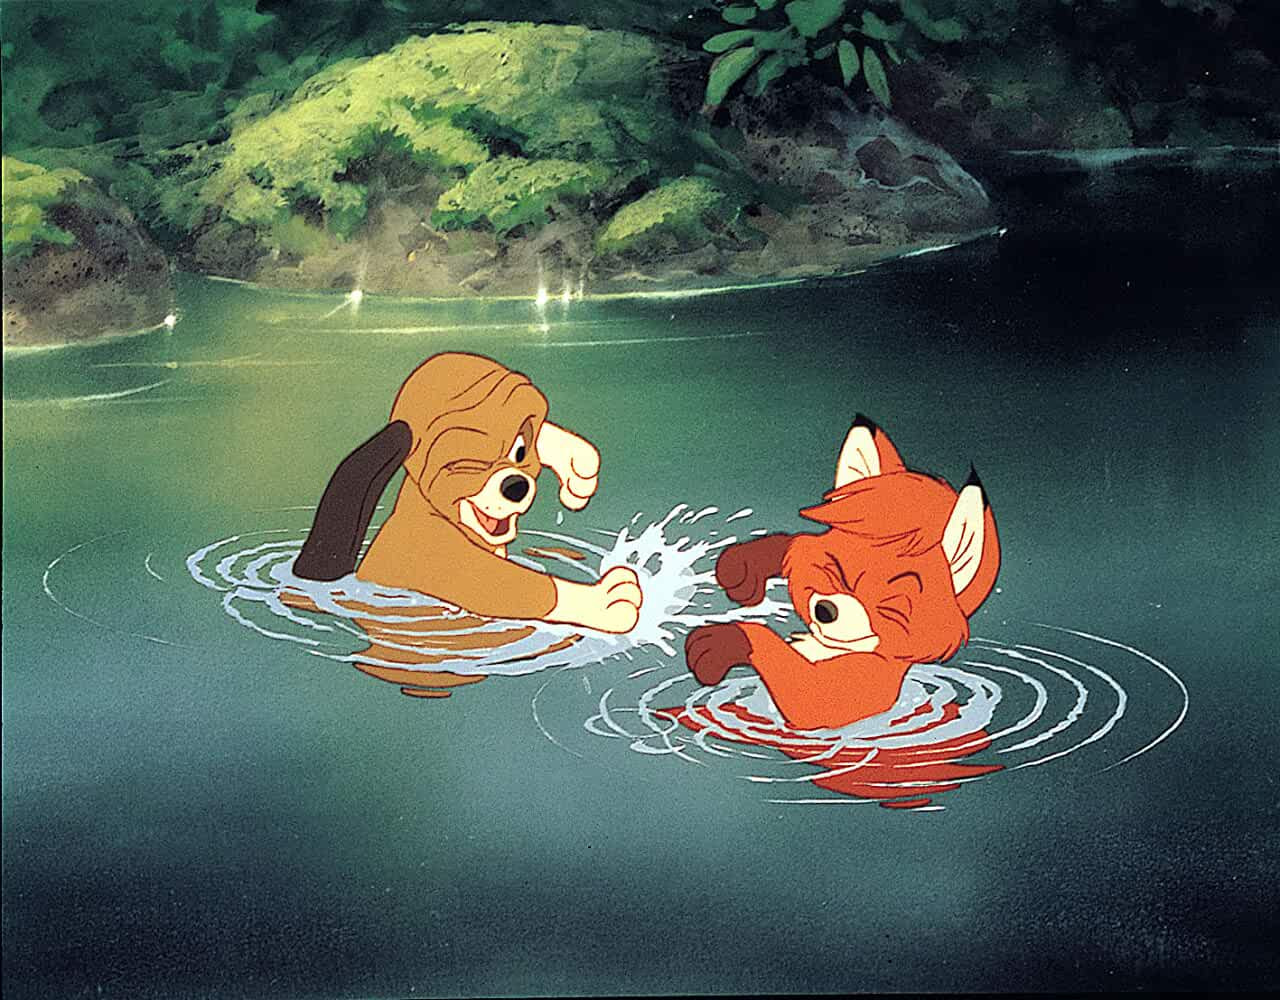 Disney Films: The fox and the hound